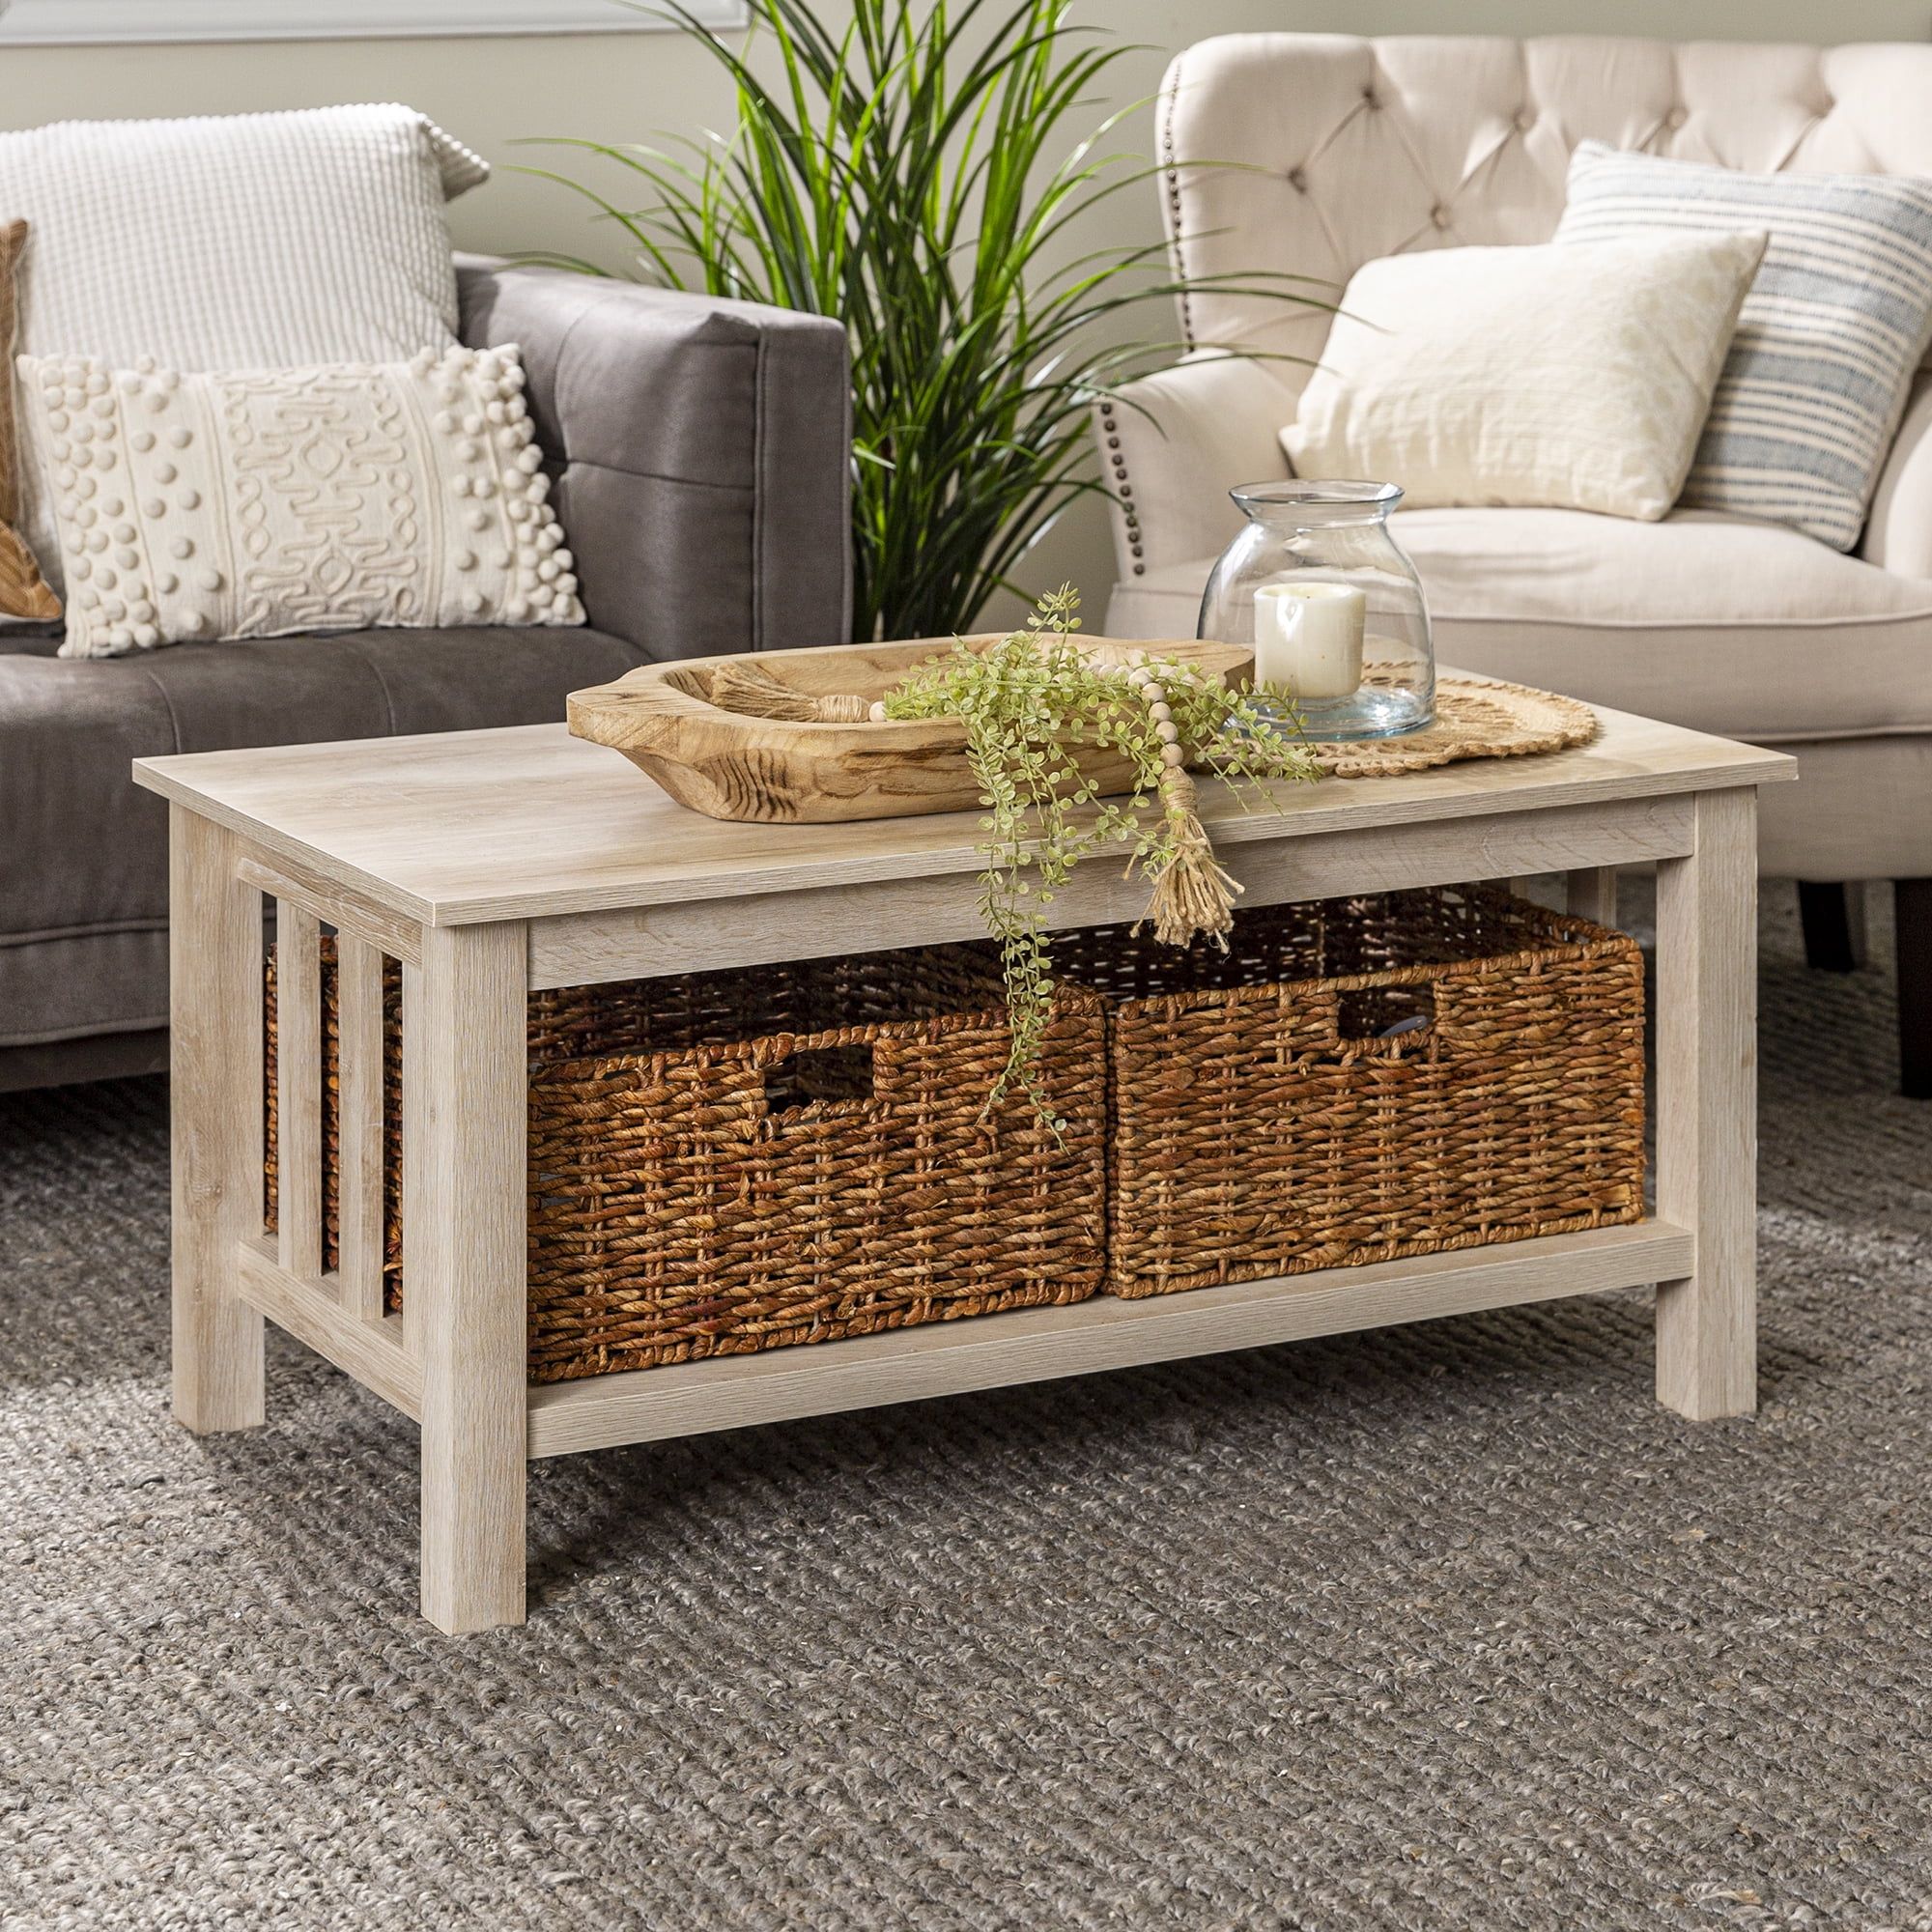 Woven Paths Traditional Storage Coffee Table With Bins, White Oak Pertaining To Coffee Tables With Open Storage Shelves (Gallery 11 of 20)